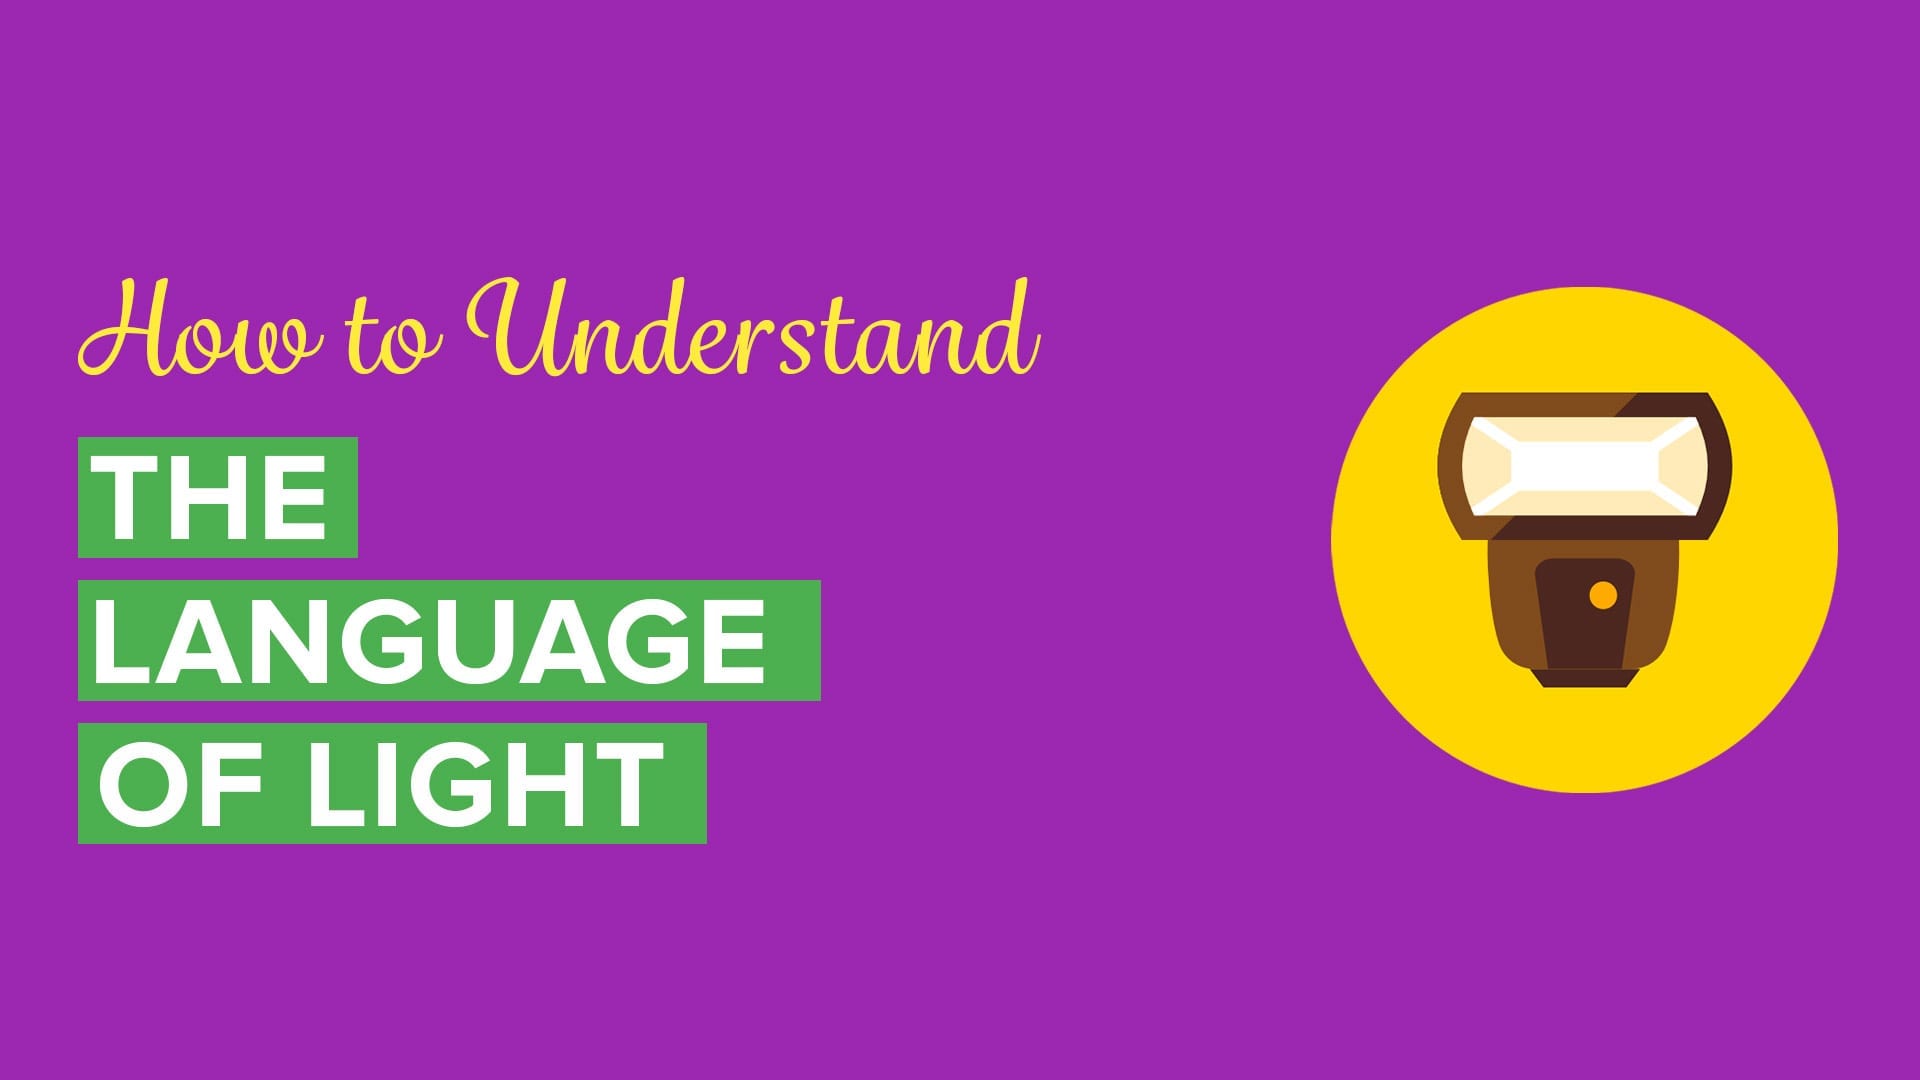 How to Understand the Language of Light